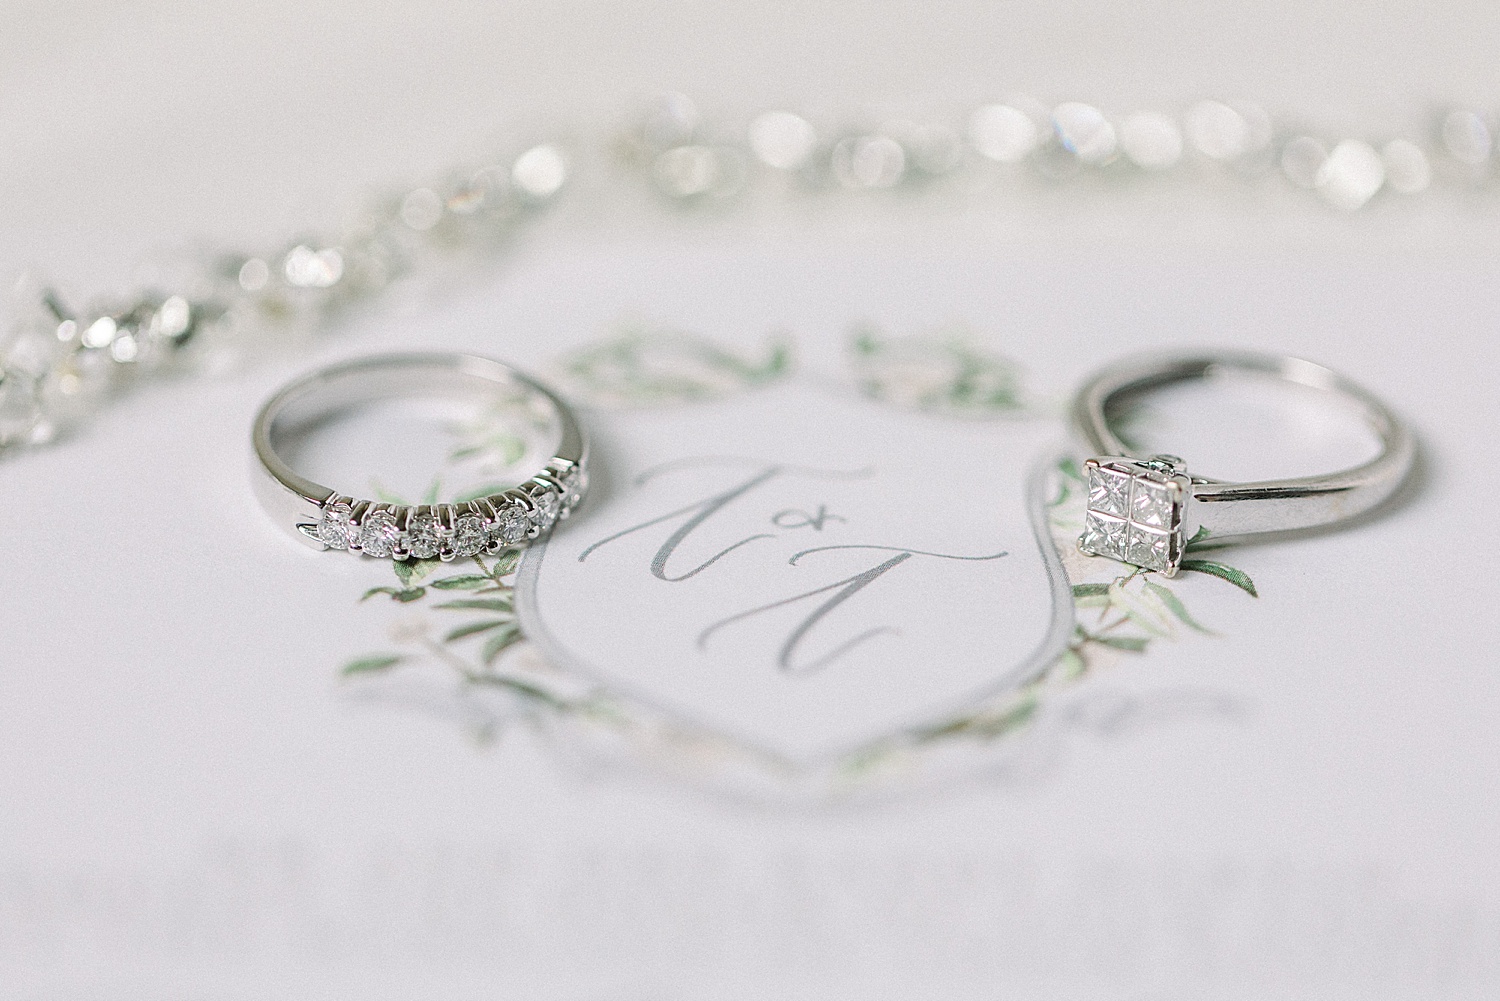 Wedding rings from The Sonnet House wedding in Alabama